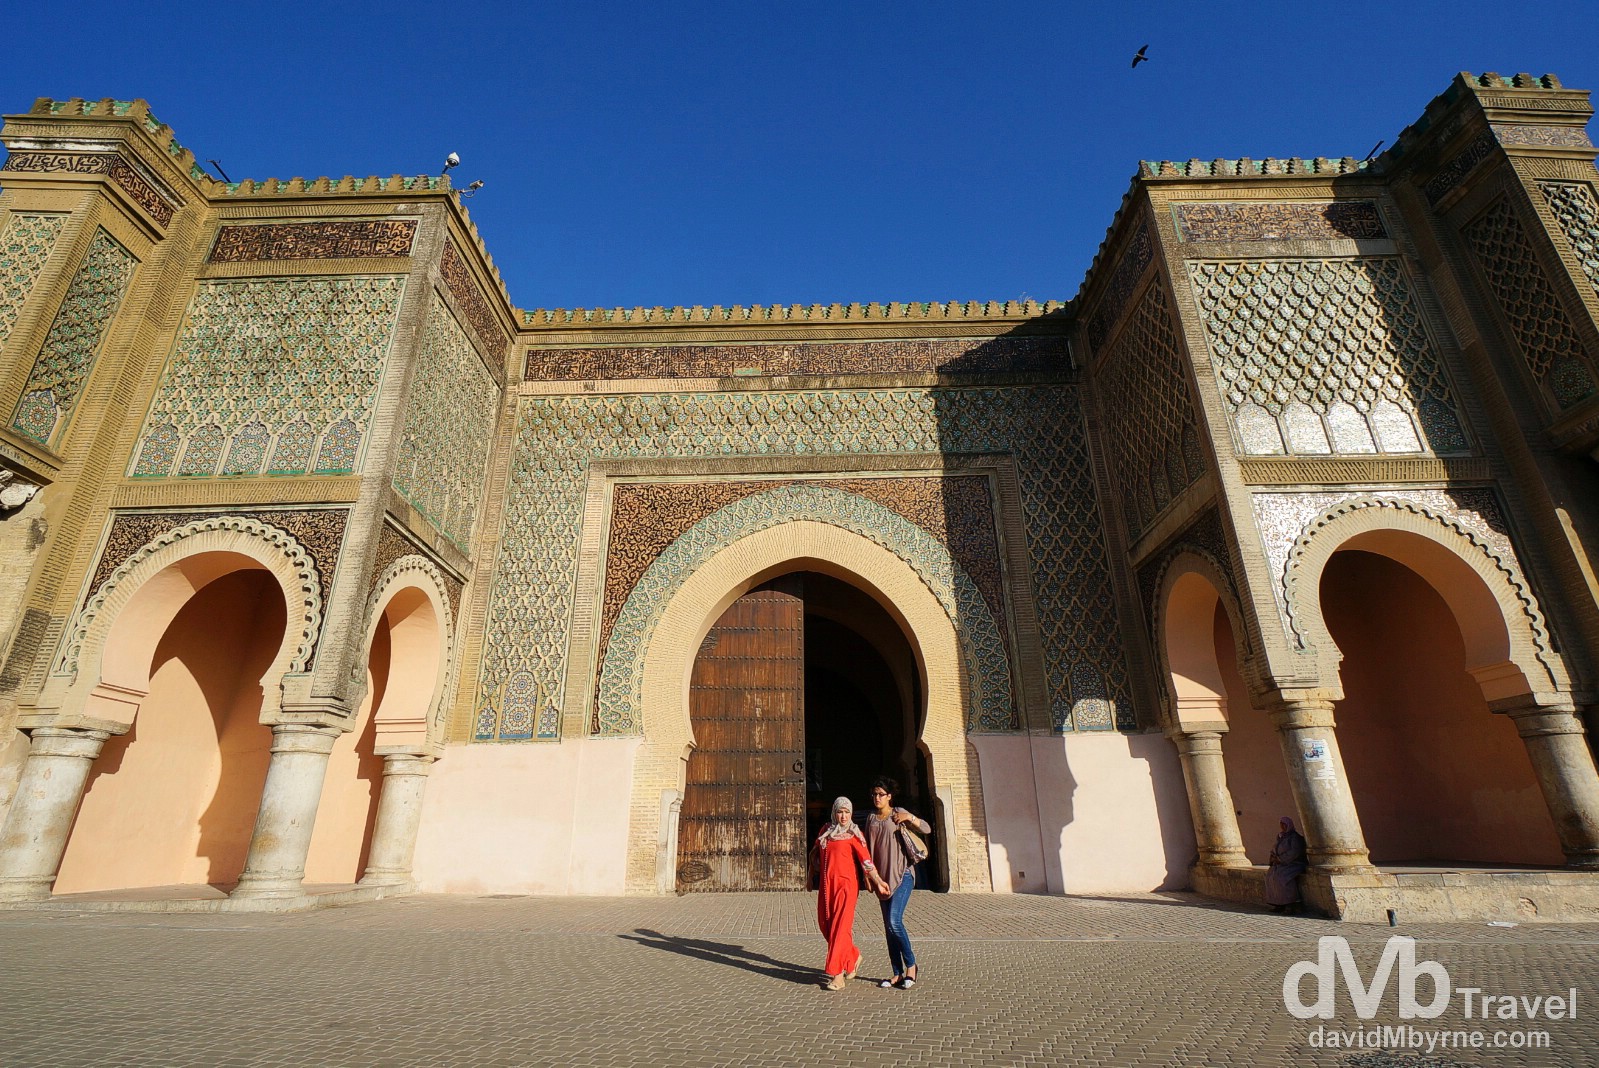 The gateway Bob Mansour in Meknes, Morocco. May 23rd, 2014.